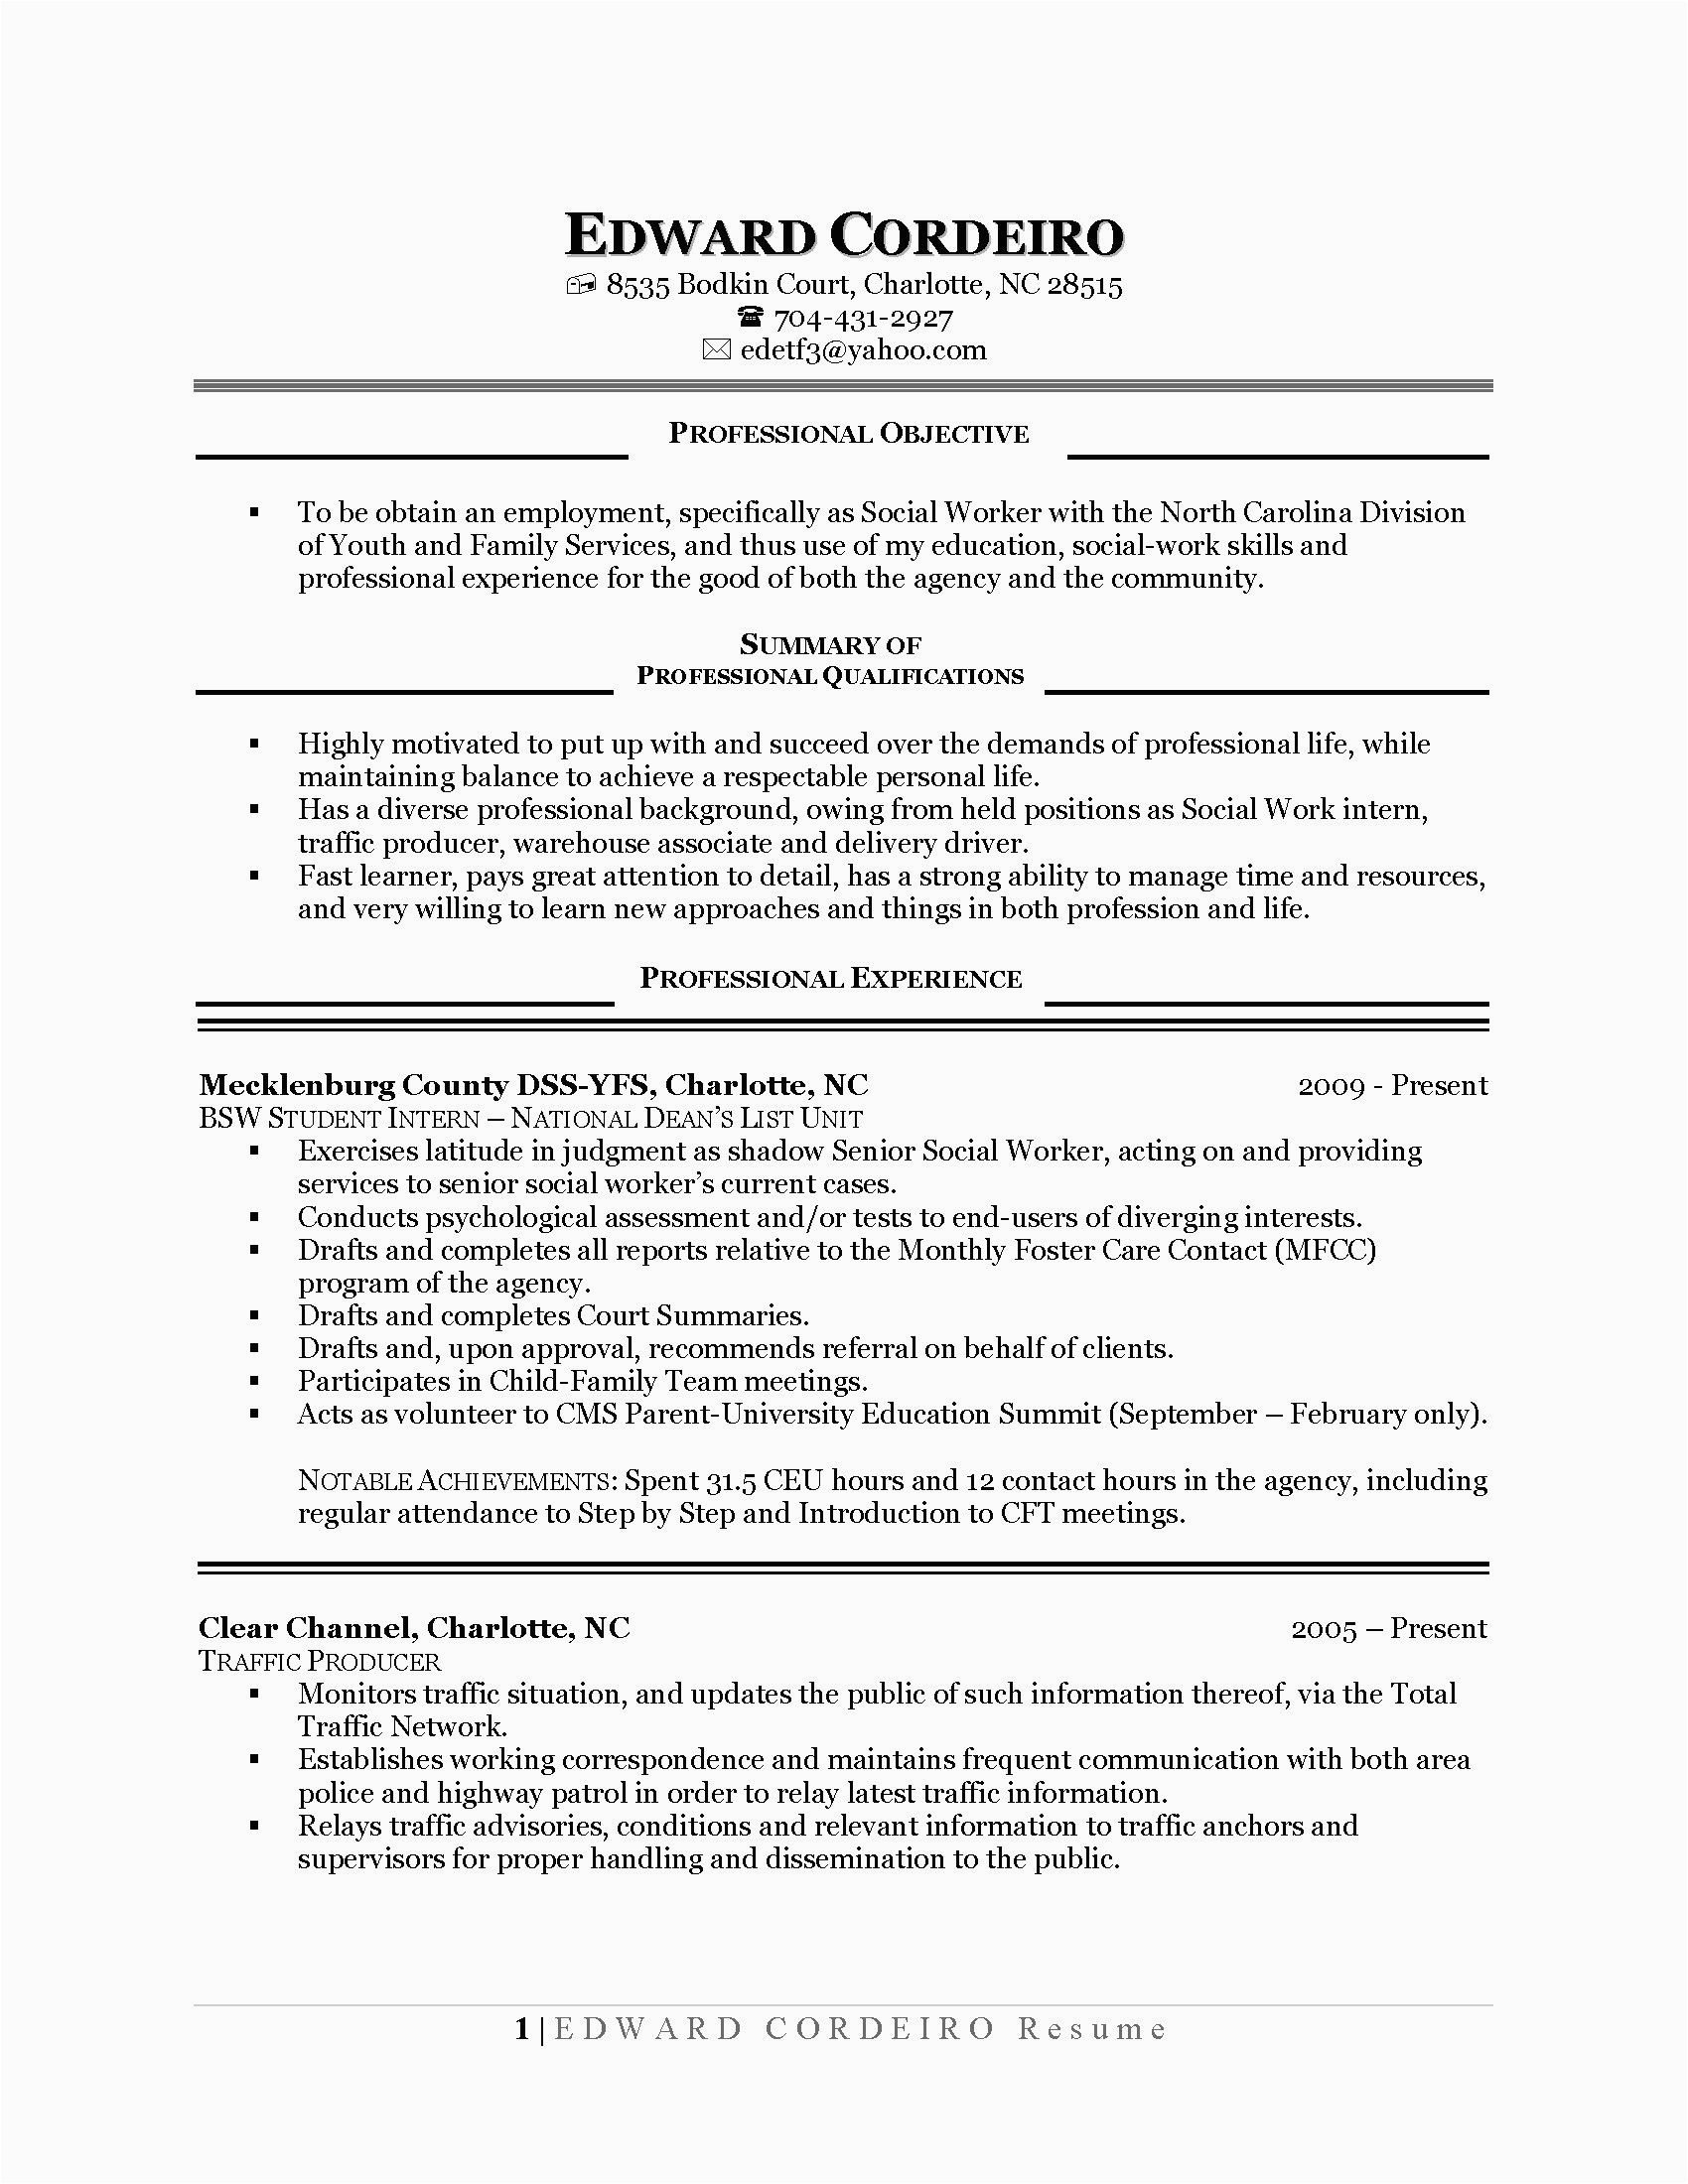 Gatech Center for Career Discovery and Development Sample Resume 68 Cool Collection Examples Work Experience A Resume Check